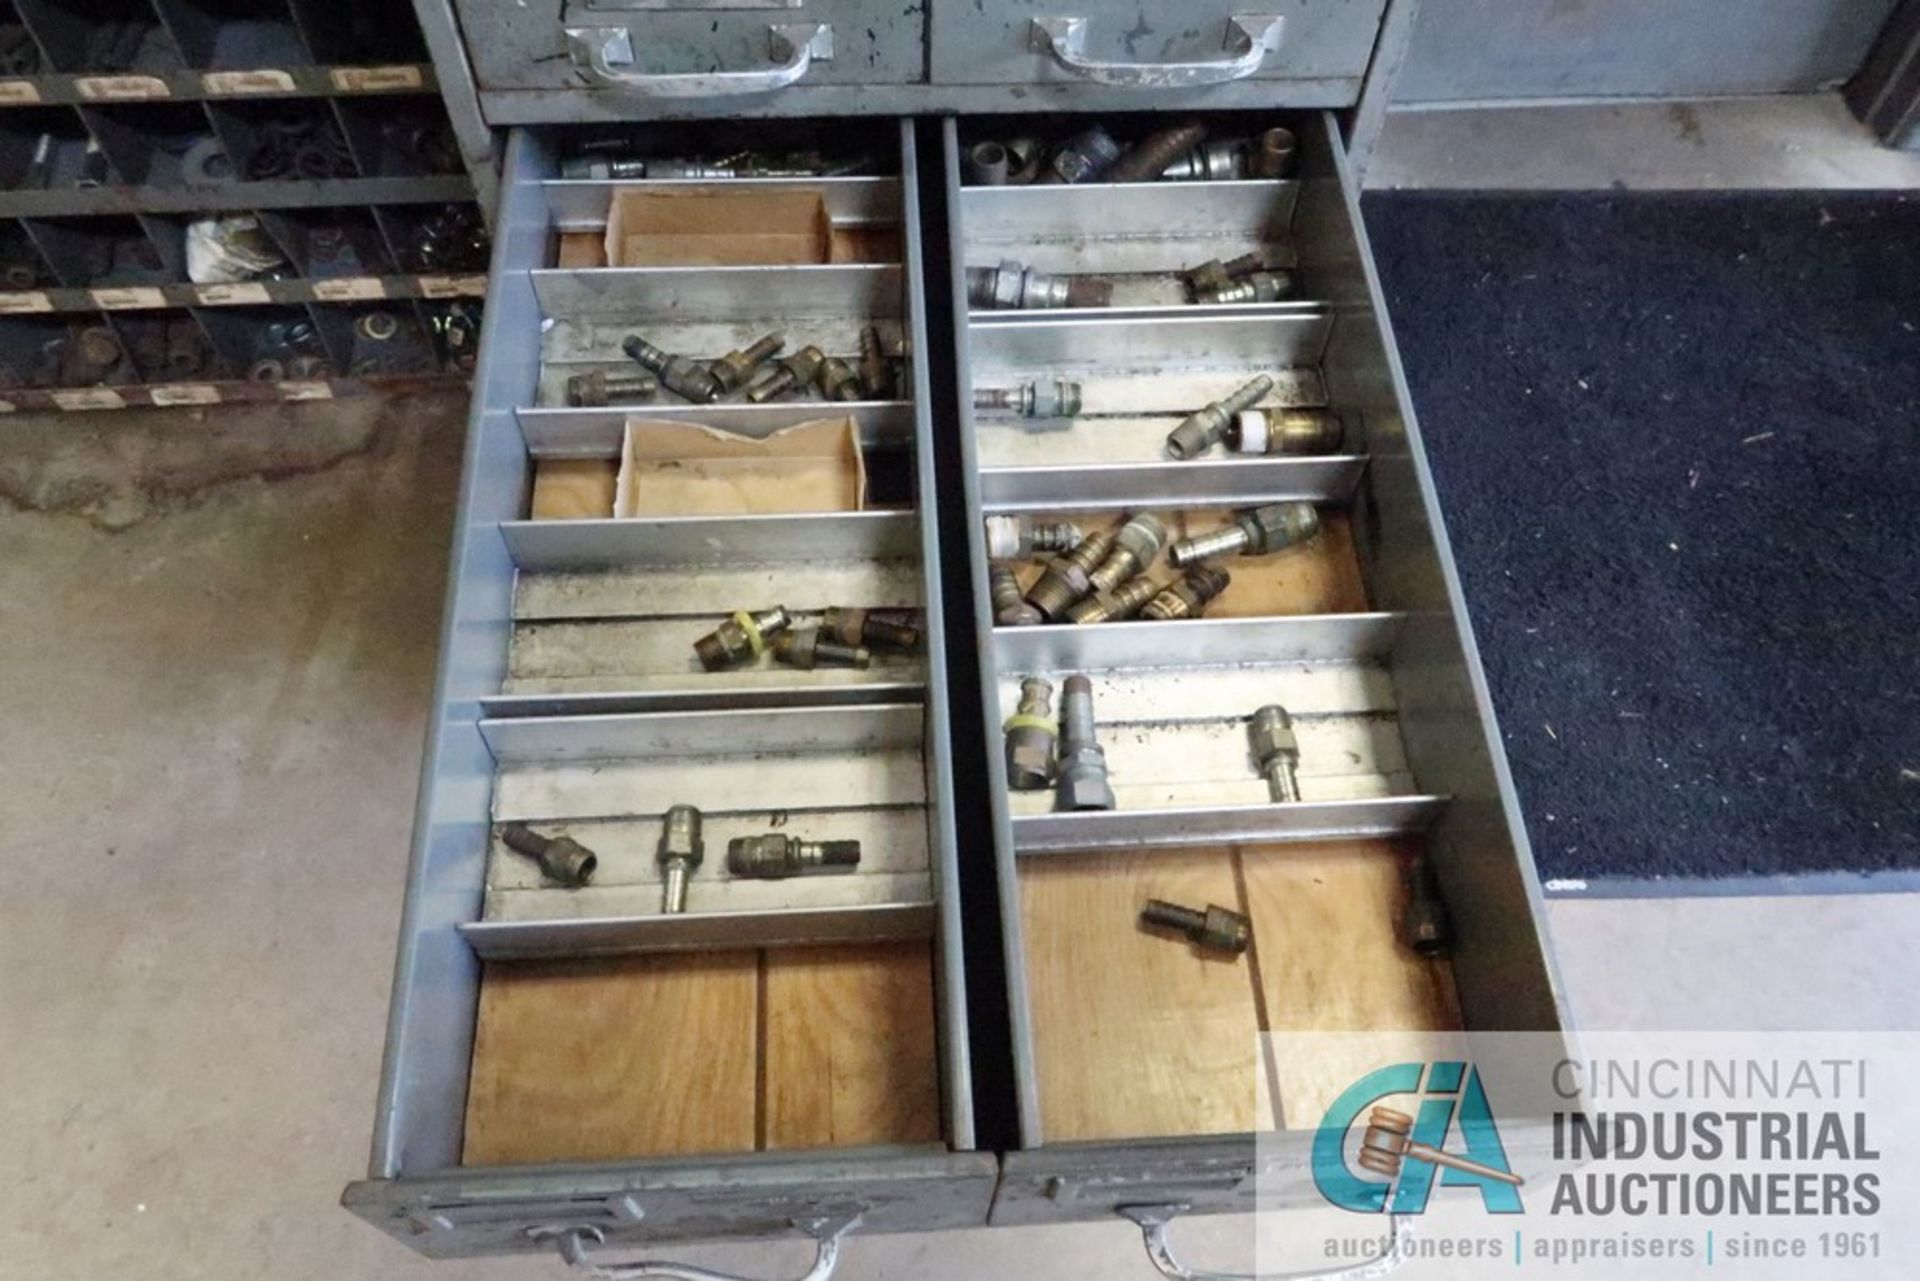 (LOT) MISCELLANEOUS ELECTRICAL, PNEUMATIC, AND MACHINE COMPONENTS WITH CABINETS - Image 7 of 15